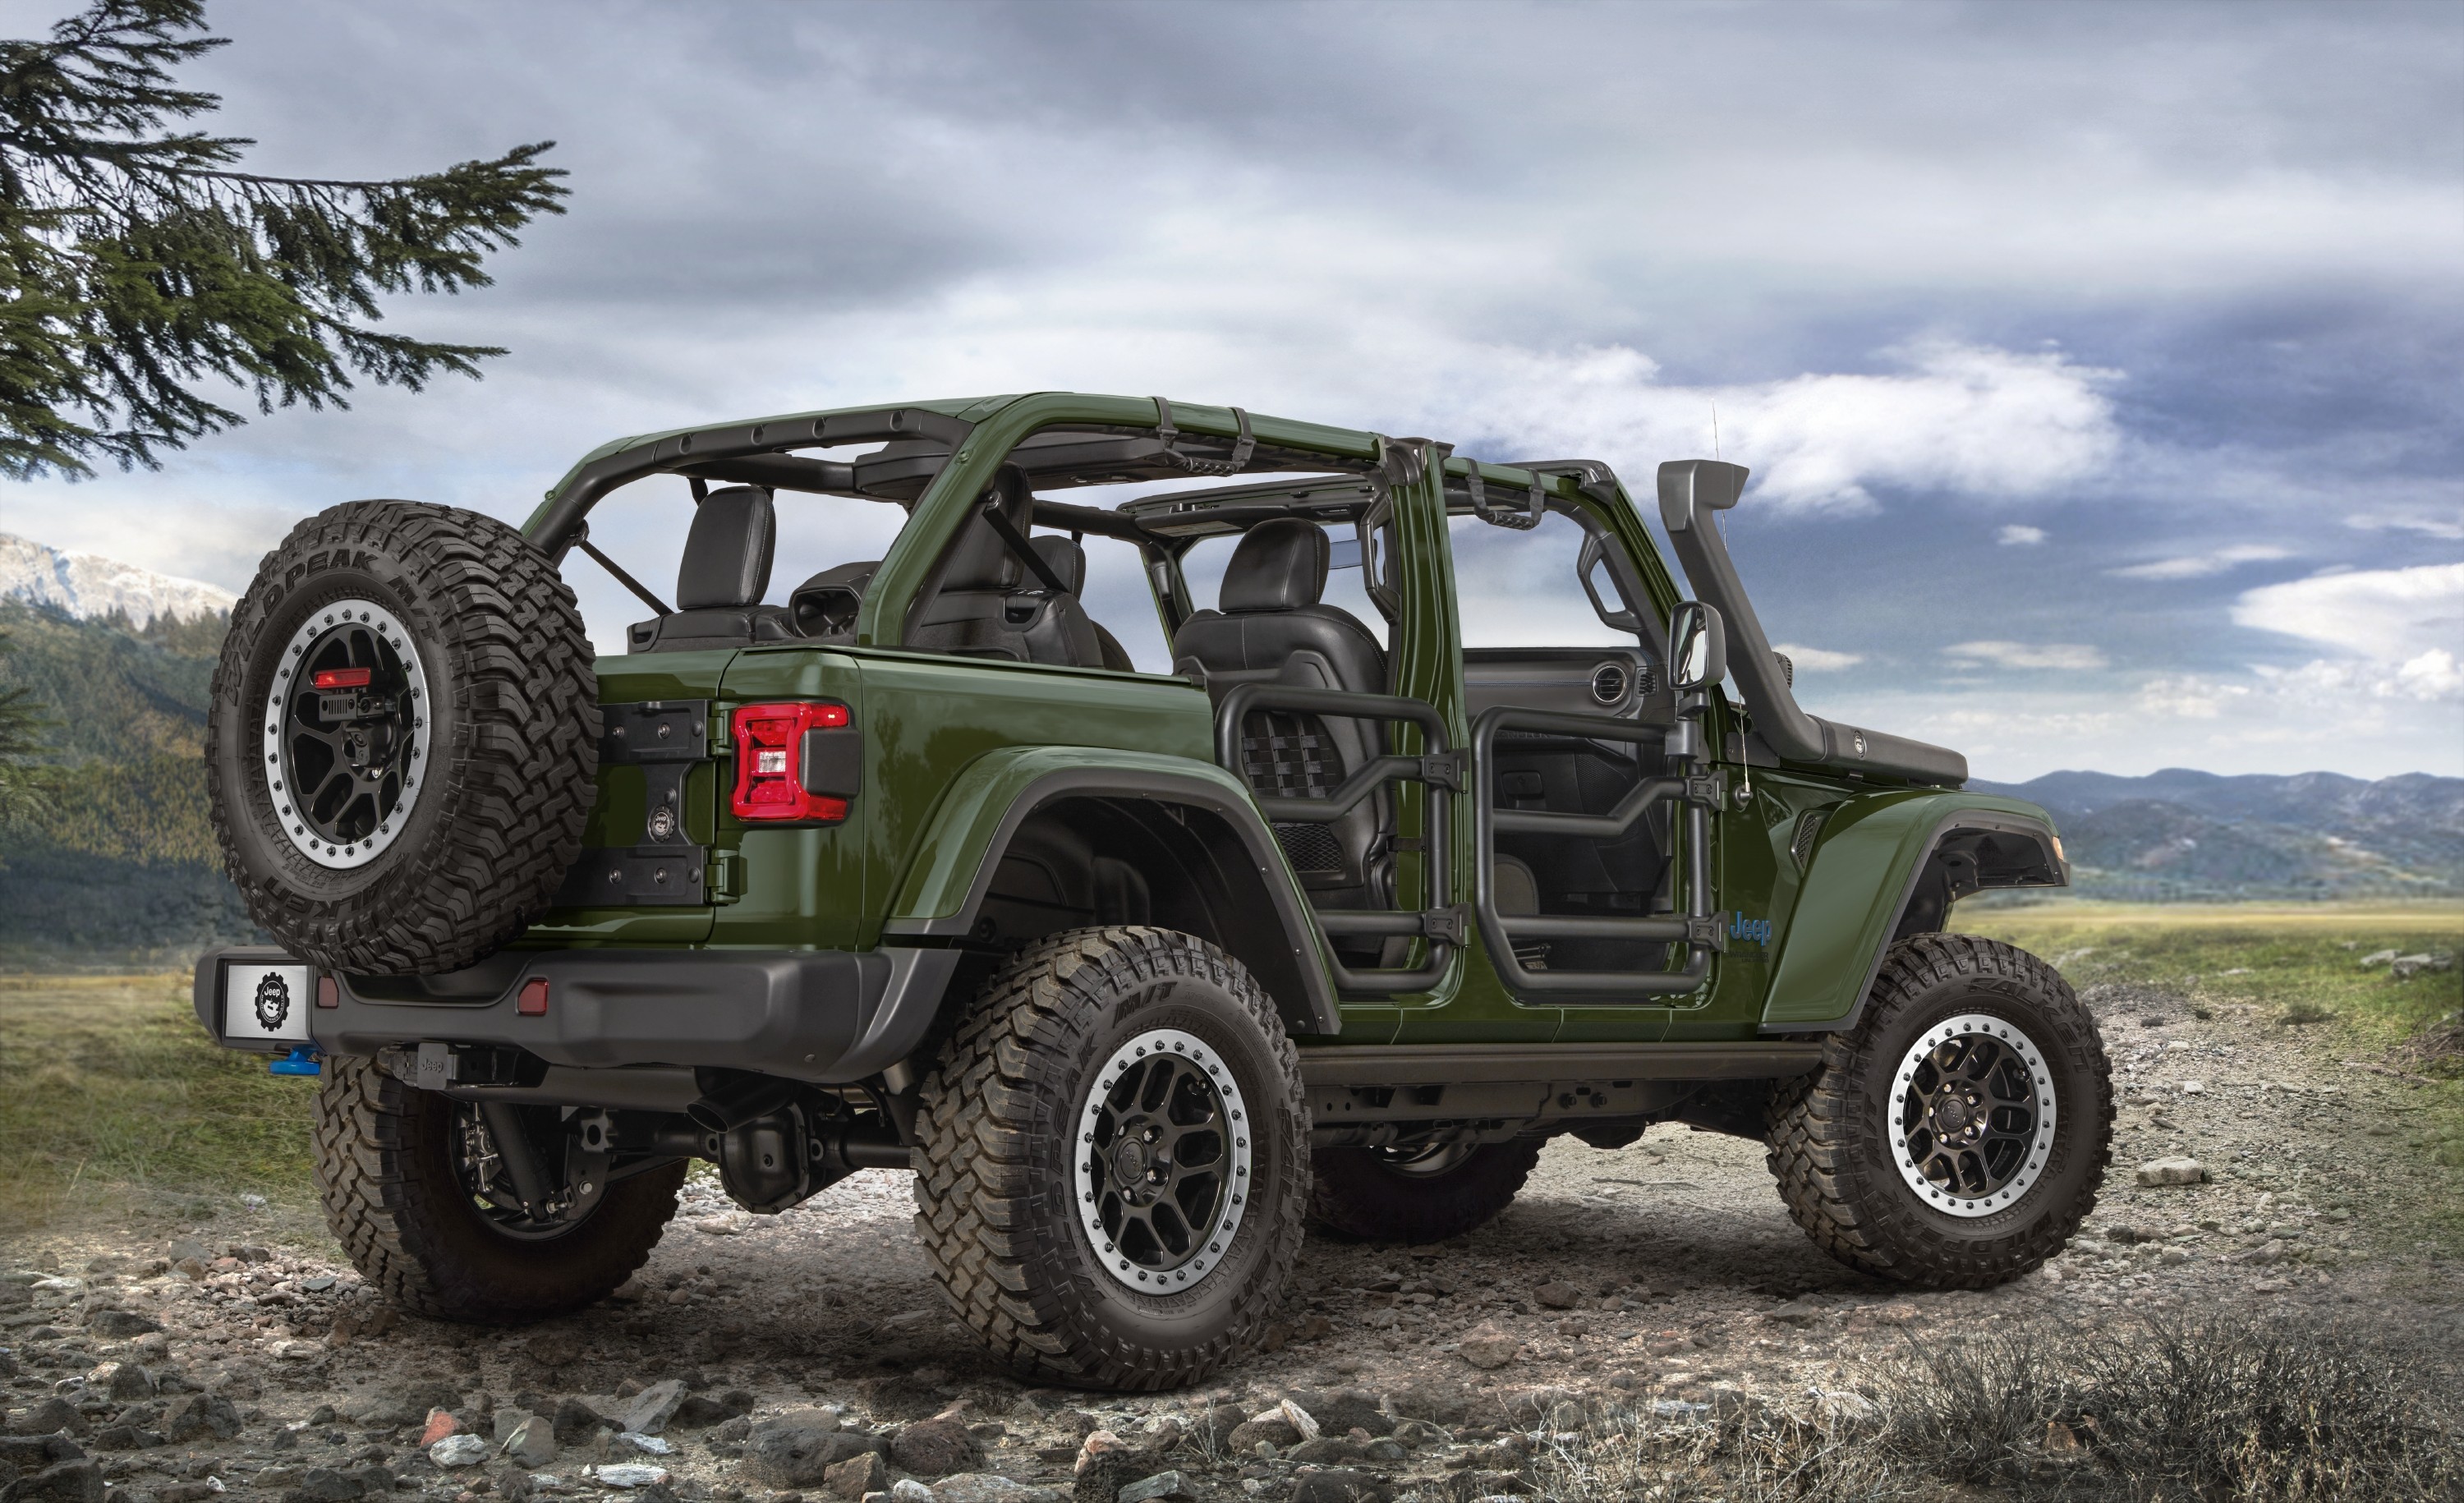 2021 Jeep Wrangler 4xe Performance Parts Include a 2.0Inch Lift Kit